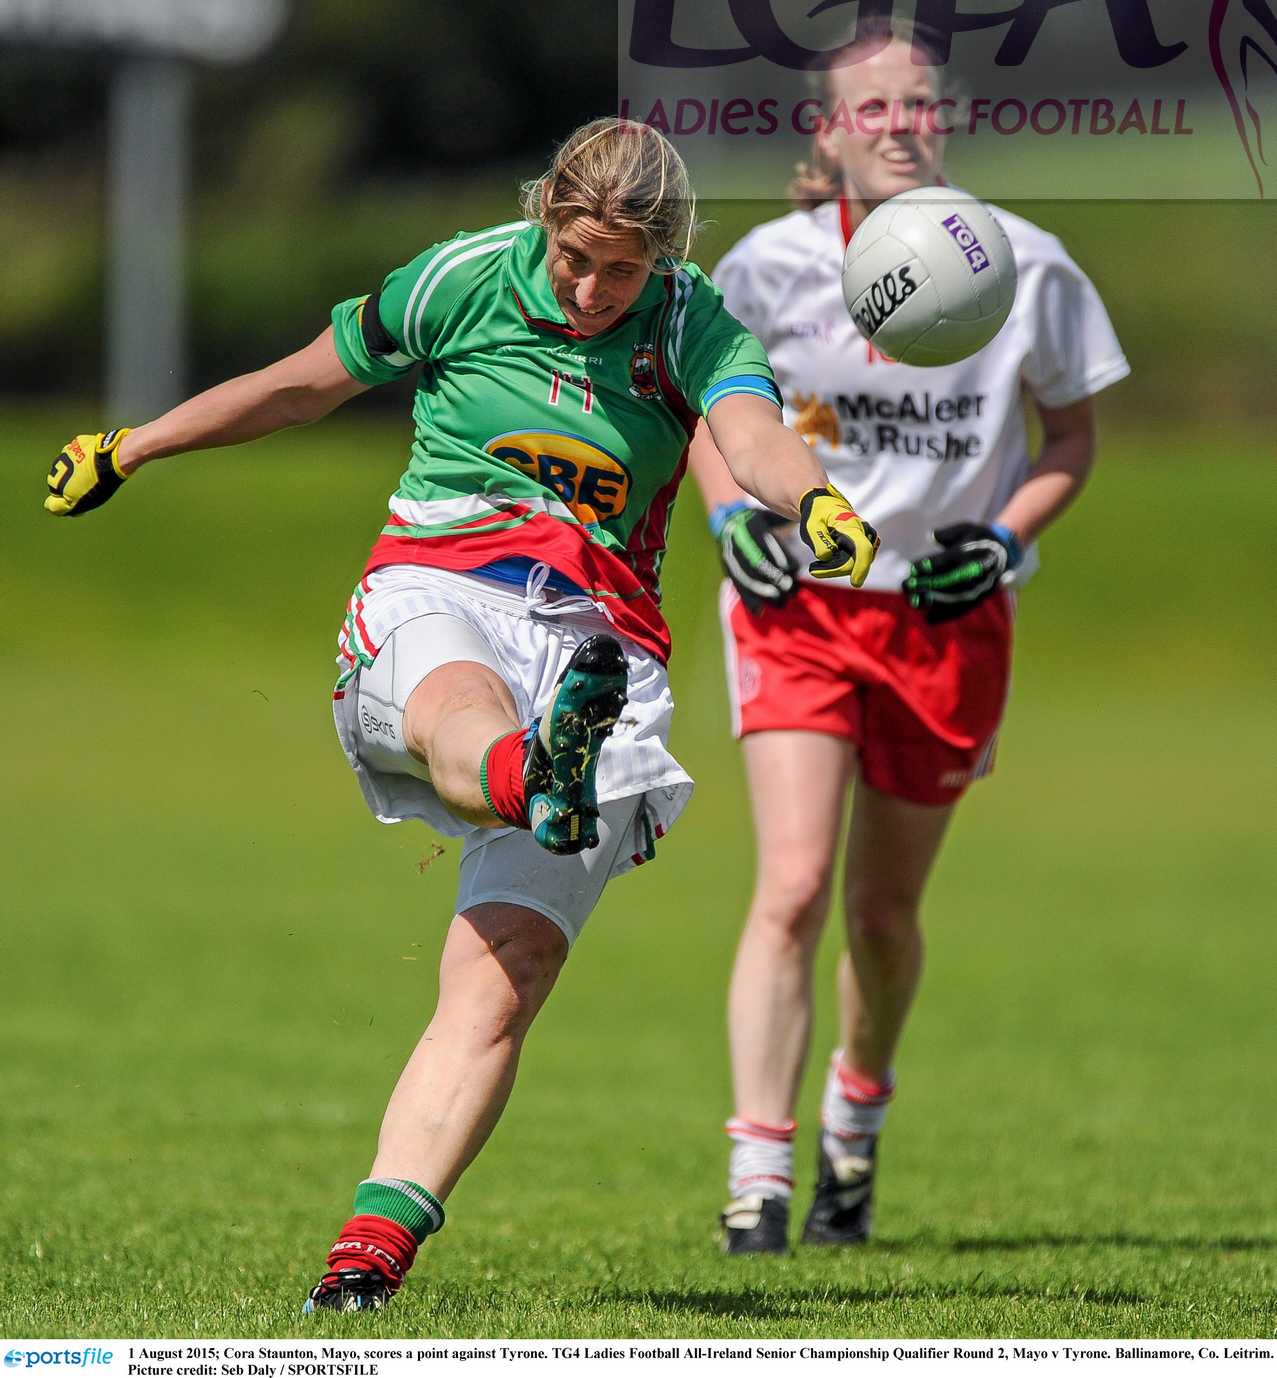 1 August 2015; Cora Staunton, Mayo, scores a point against Tyrone. TG4 Ladies Football All-Ireland Senior Championship Qualifier Round 2, Mayo v Tyrone. Ballinamore, Co. Leitrim. Picture credit: Seb Daly / SPORTSFILE